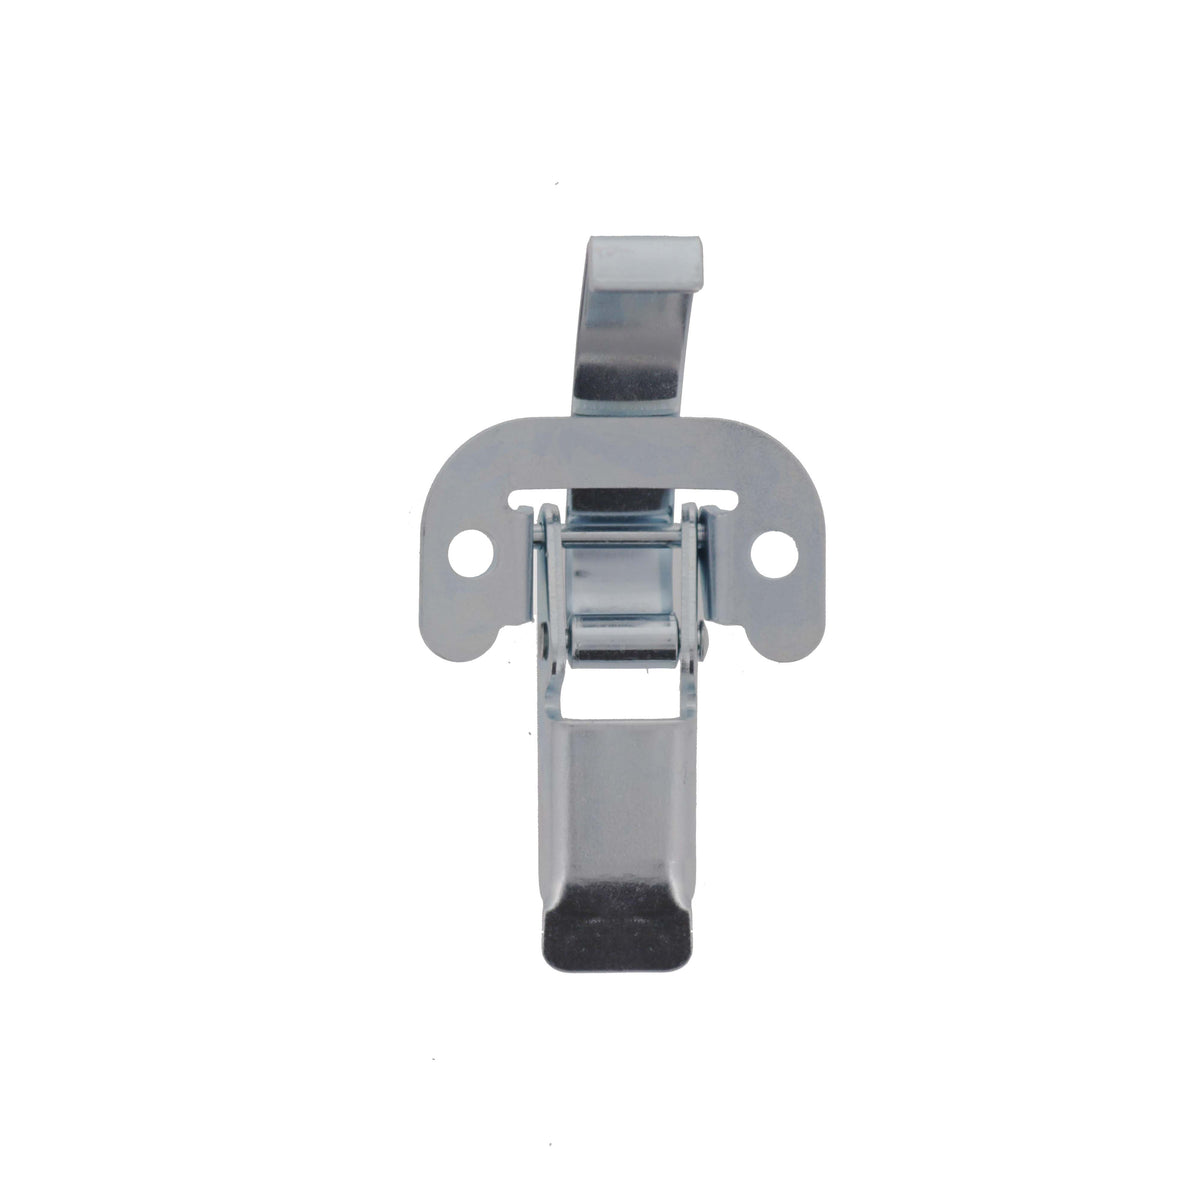 Lever Operated Drawlatch with curved mounting plate